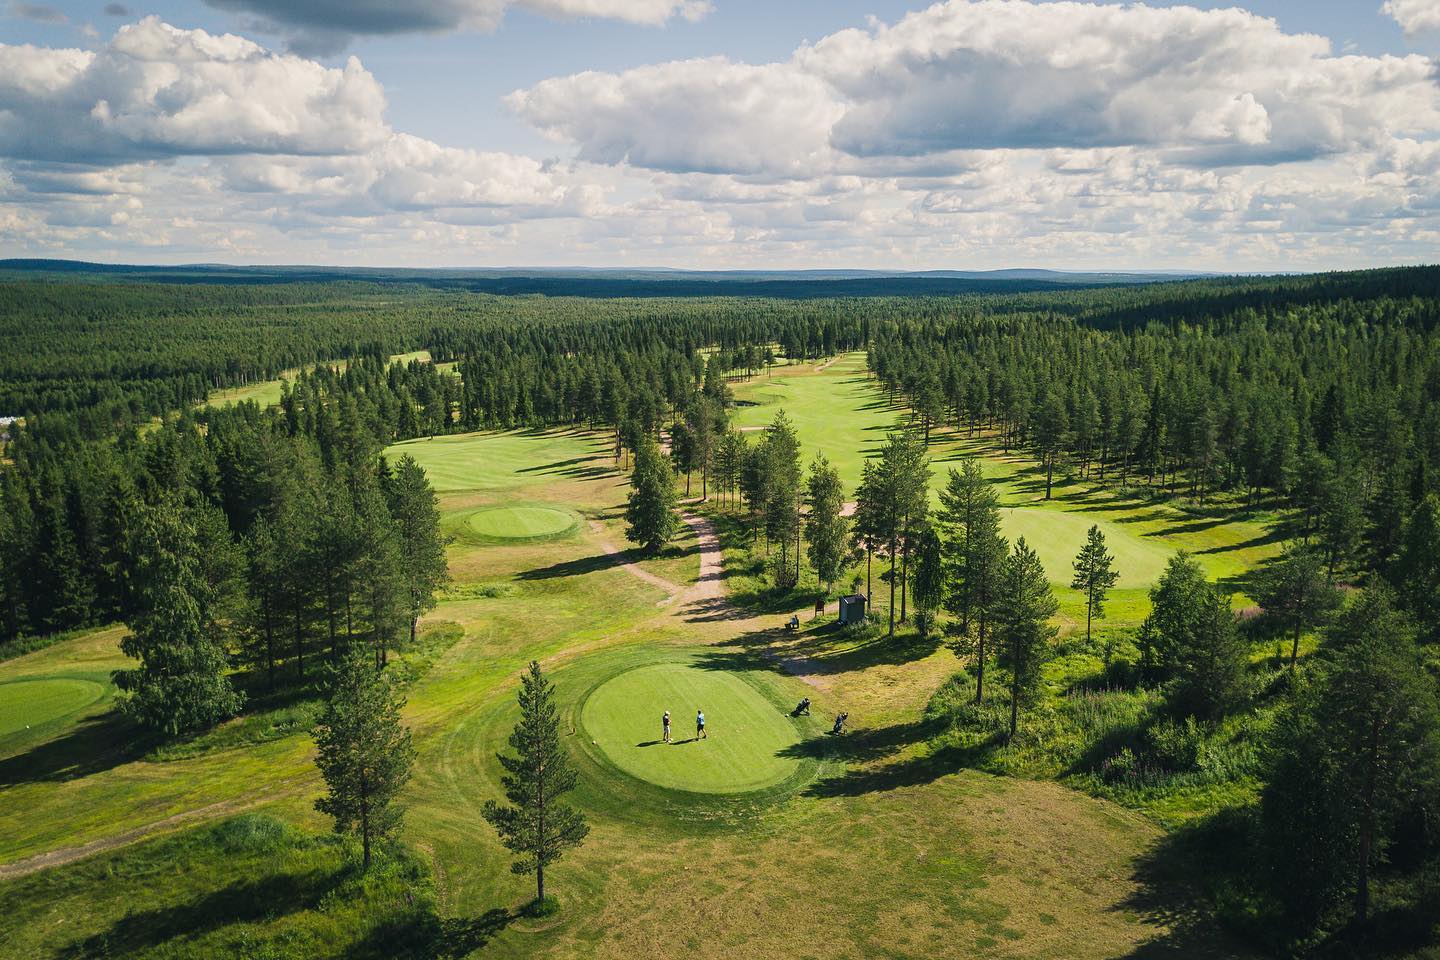 The nightless nights of Finnish summer give you endless hours to enjoy life... @santaclausgolf is located next to Ounasvaara, a few kilometers walk from Rovaniemi city center. 

Club house open: 8am–7pm

Summer golf course: open

Range: open

Tel: +358(0) 200 30 200

#visitrovaniemi #rovaniemi #lapland #arcticsummer #golf #santaclausgolf